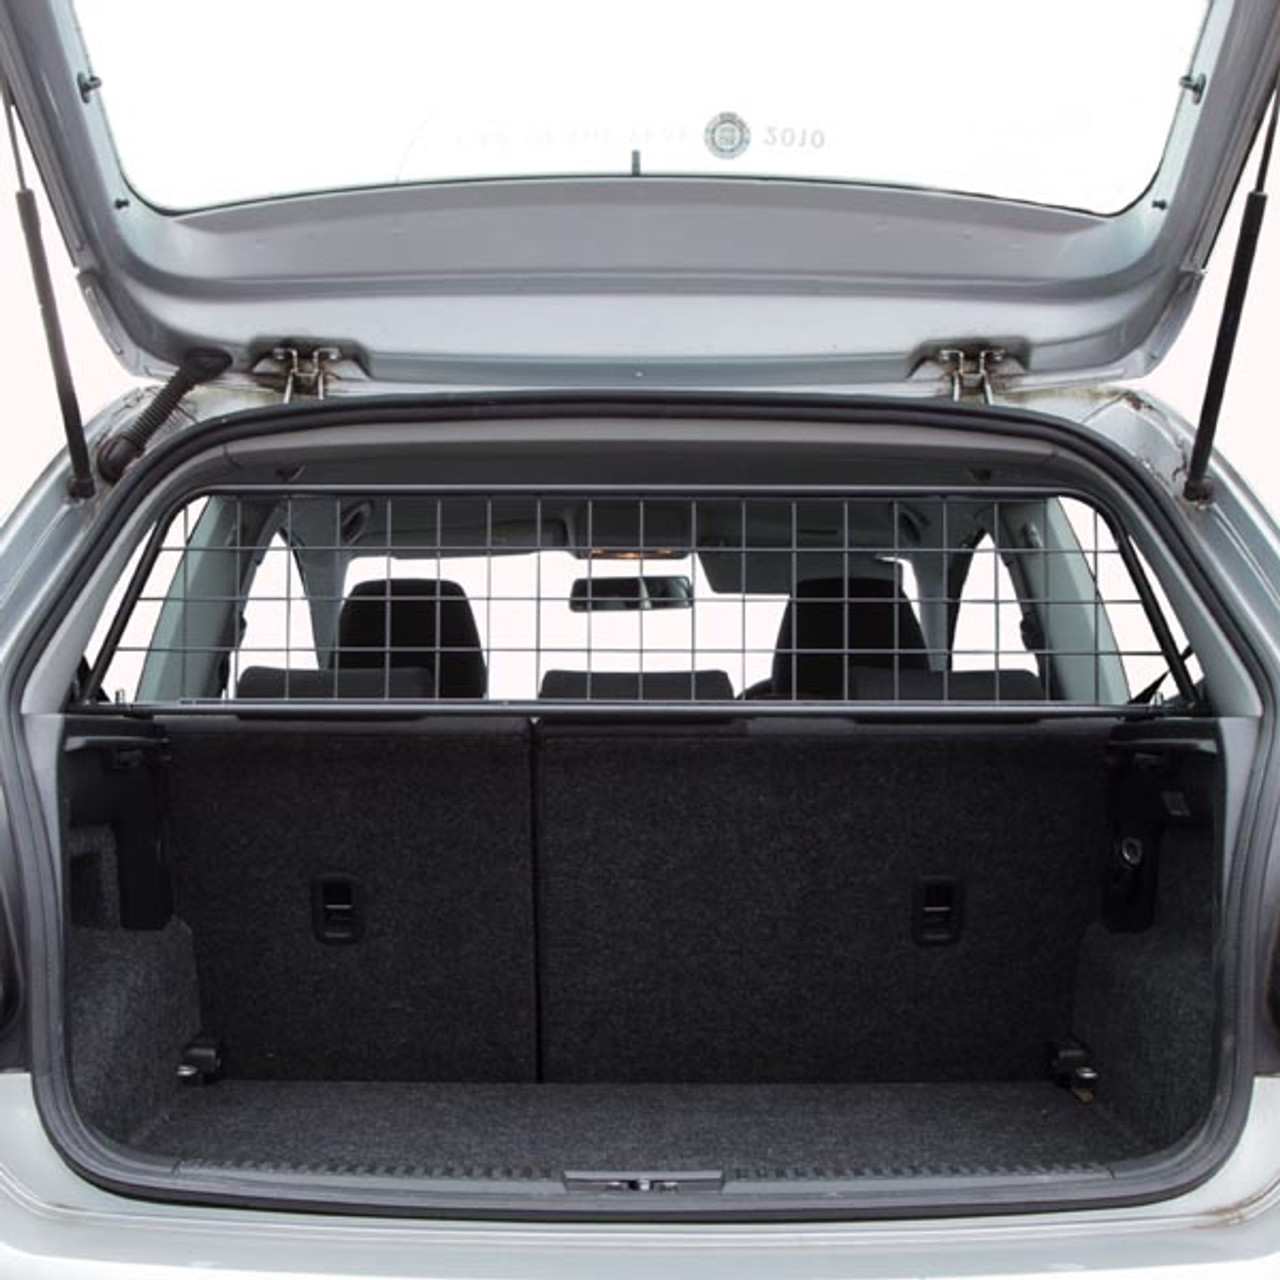 Custom Made Dog Guard for Volkswagen Polo 3 and 5 Door Hatchback 2009 to 2017